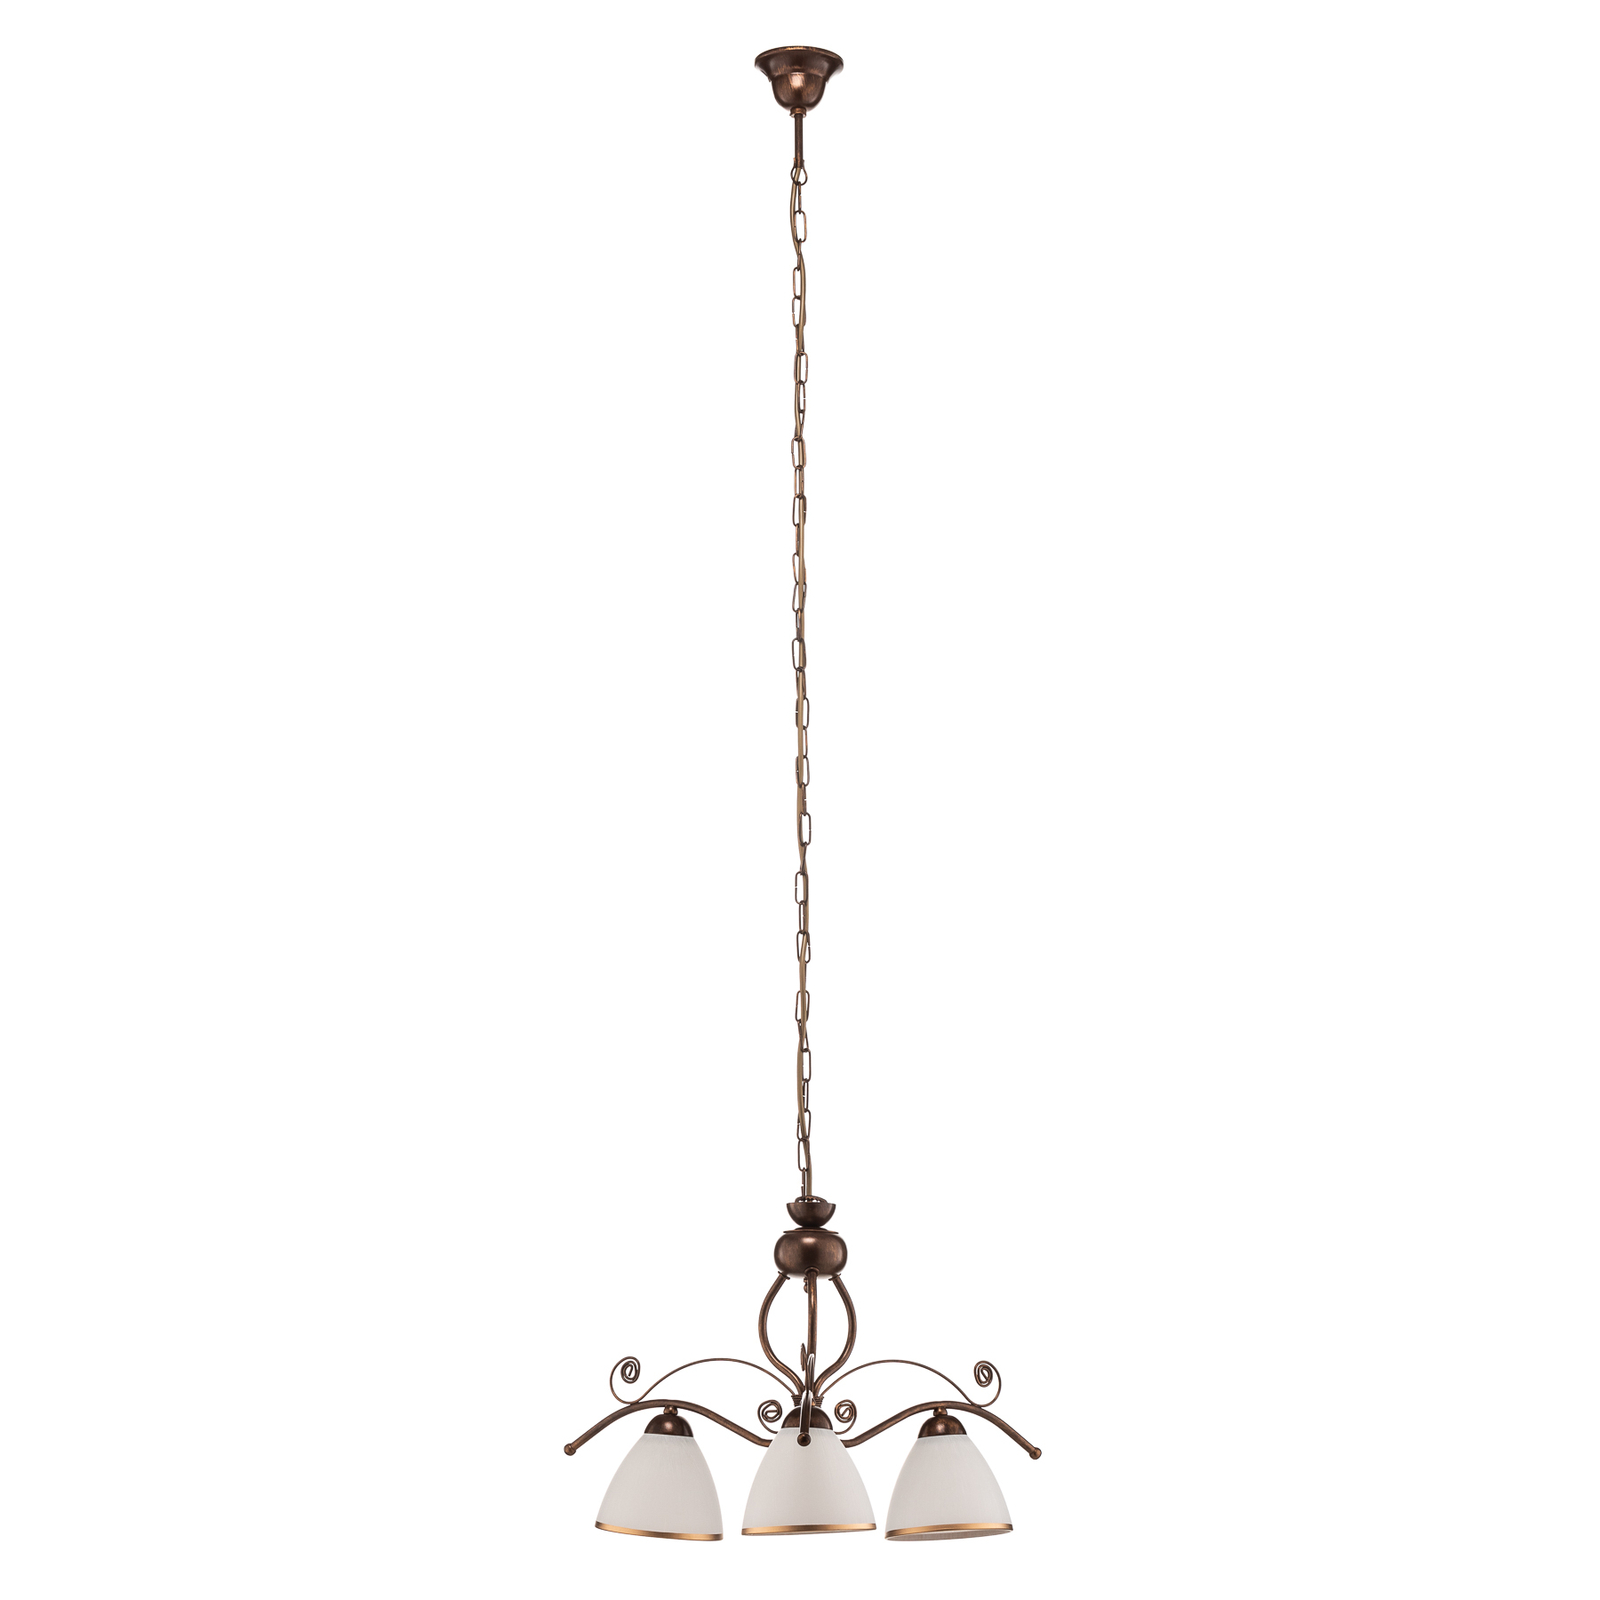 Roma hanging light in white and brown, three-bulb